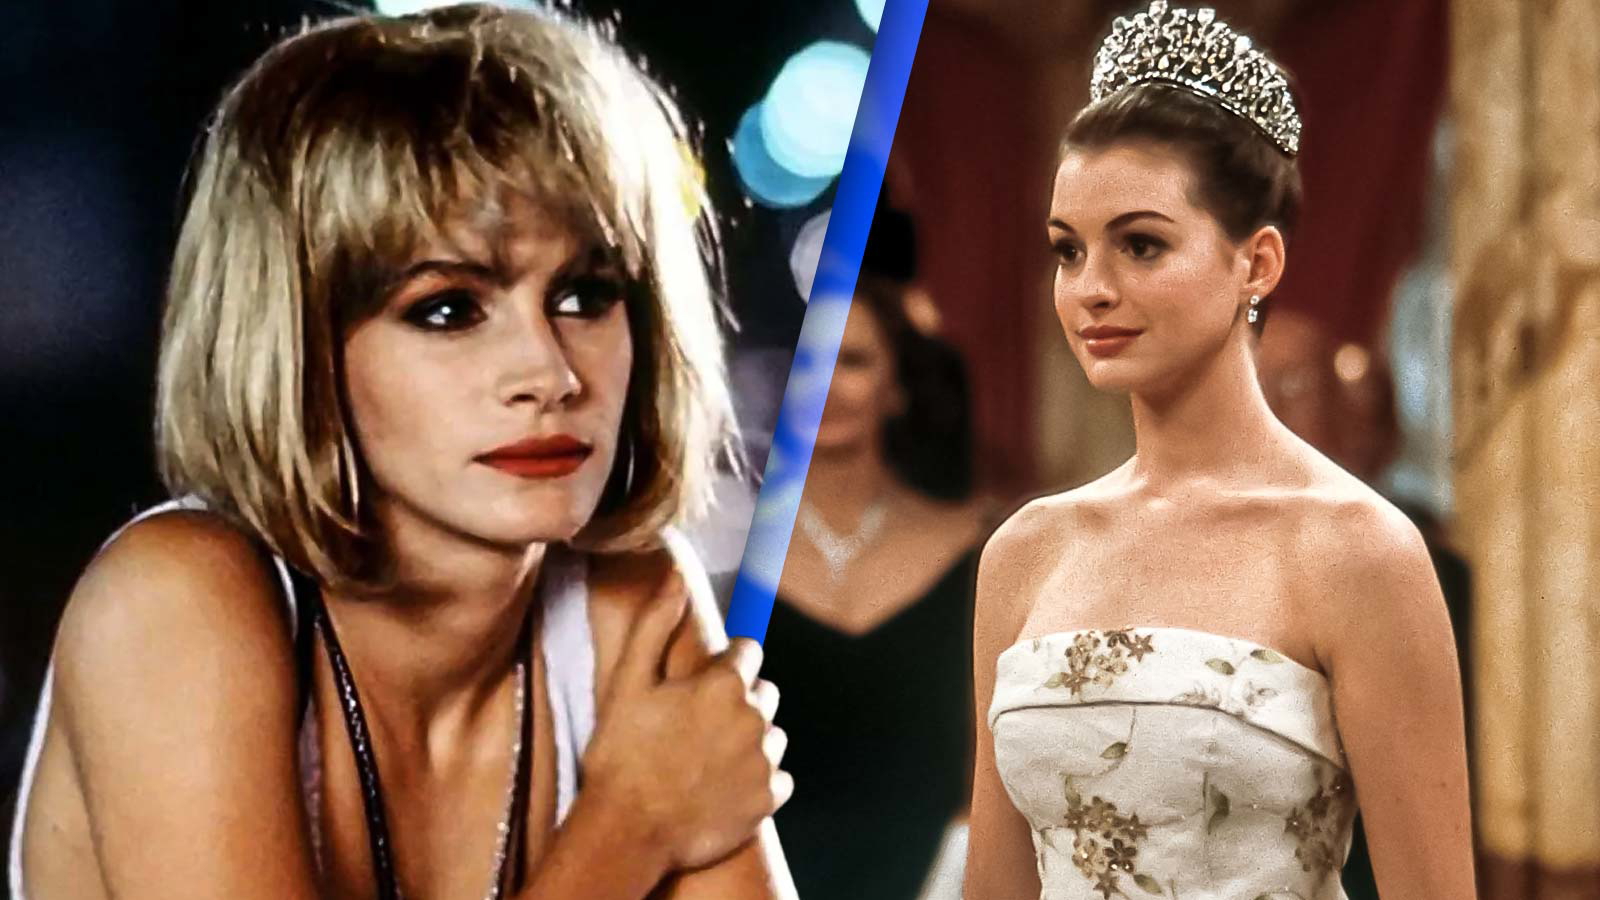 Julia Roberts’ Cult-classic ‘Pretty Woman’ Shares an Unexpected Easter Egg in Common With Anne Hathaway’s Princess Diaries Films That’ll Blow Your Mind